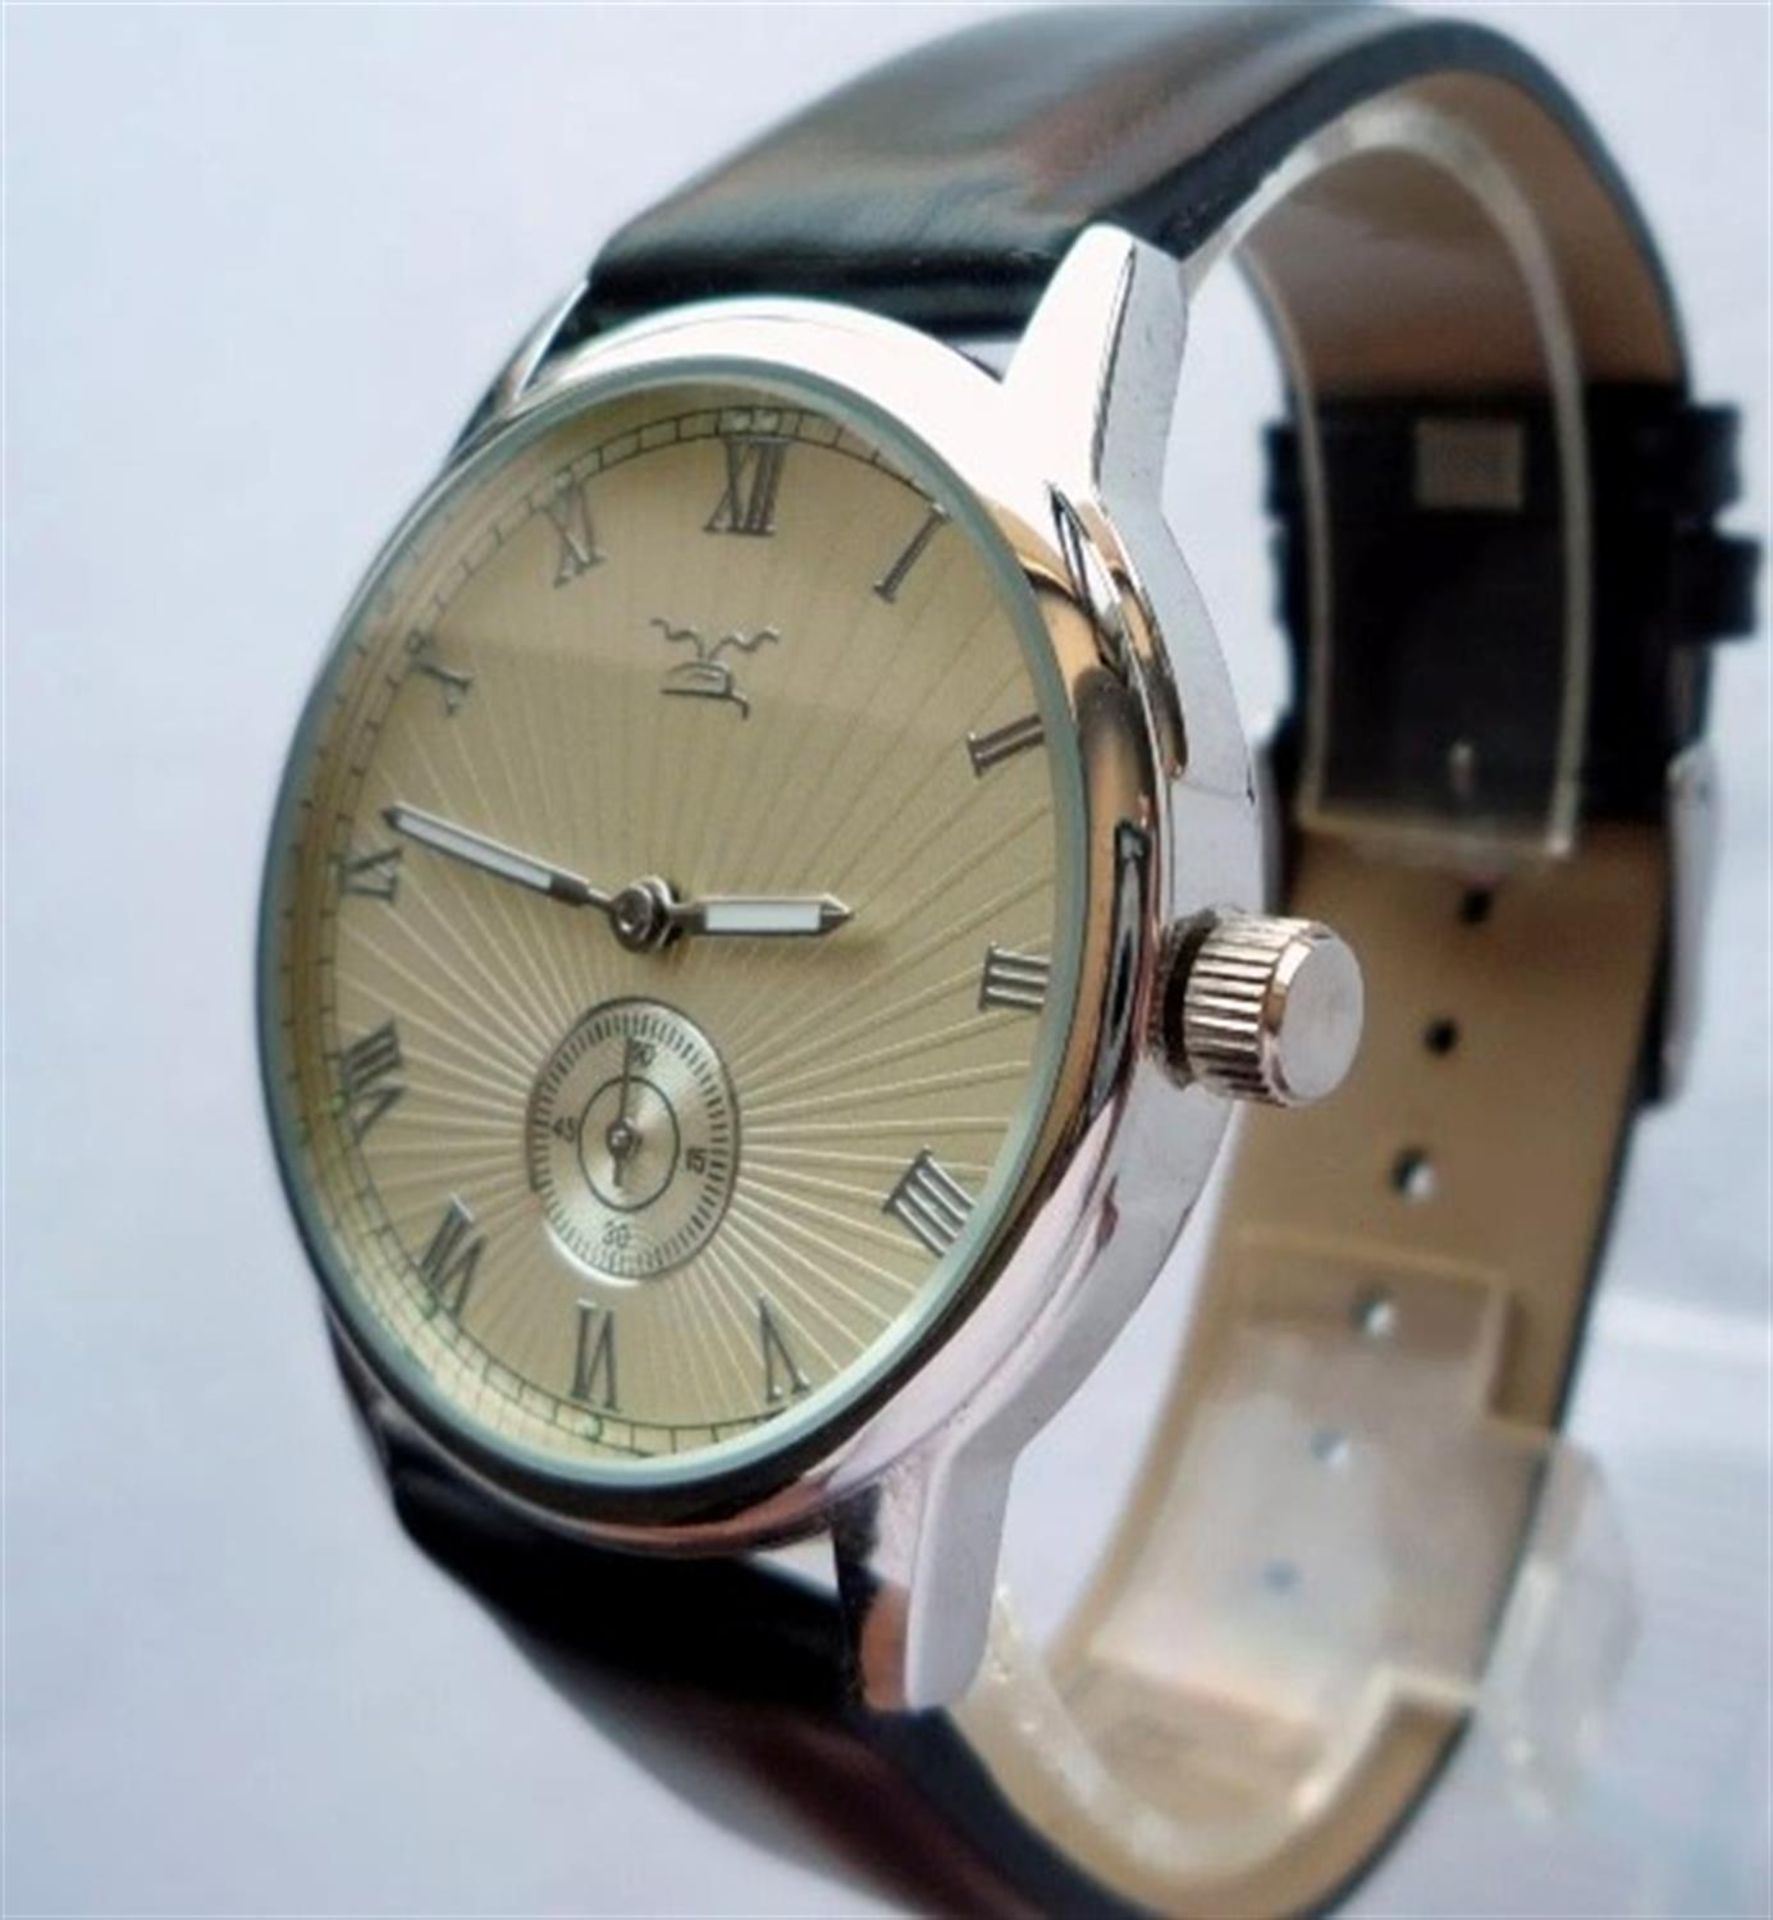 A Mercedes-Benz Classic Art Deco Style Gullwing Watch - Image 7 of 10